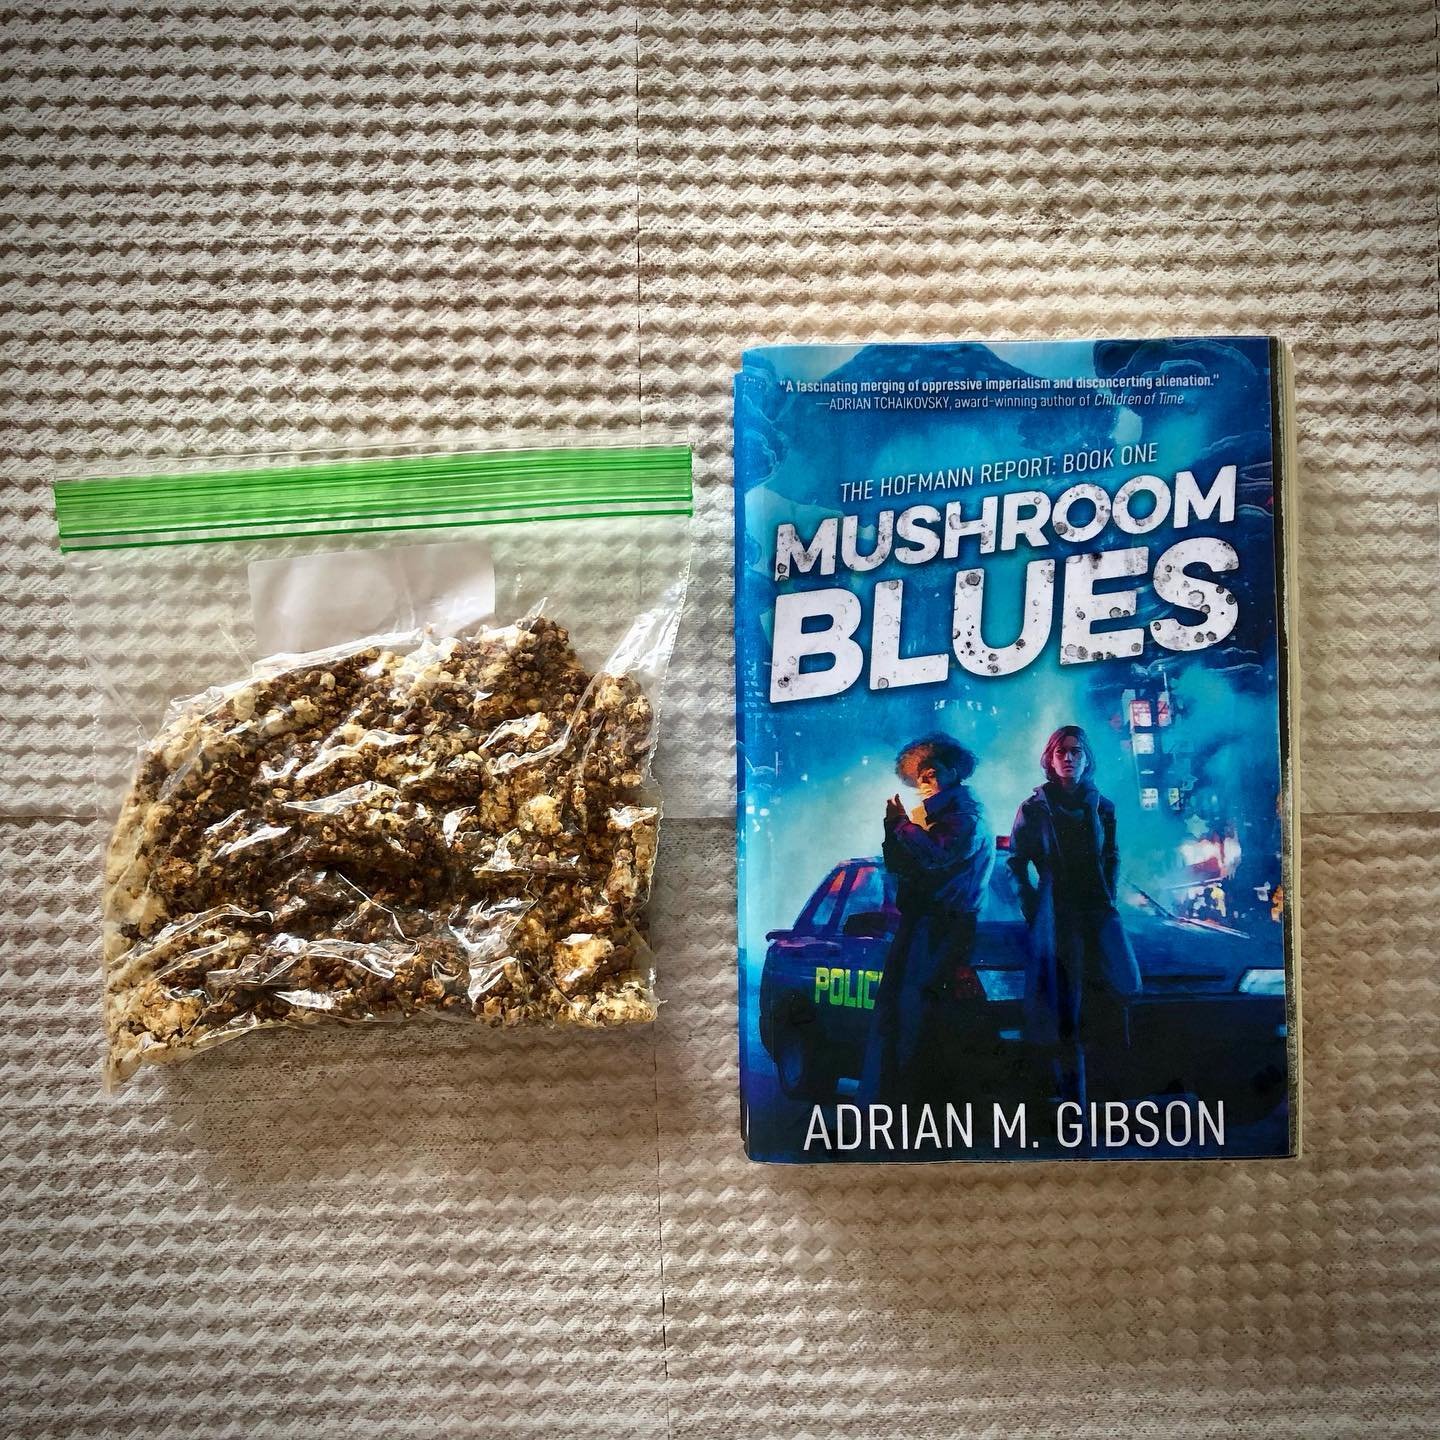 A wet copy of #MushroomBlues sterilized with boiling water. A bag of spores. What could I be planning? 🤔